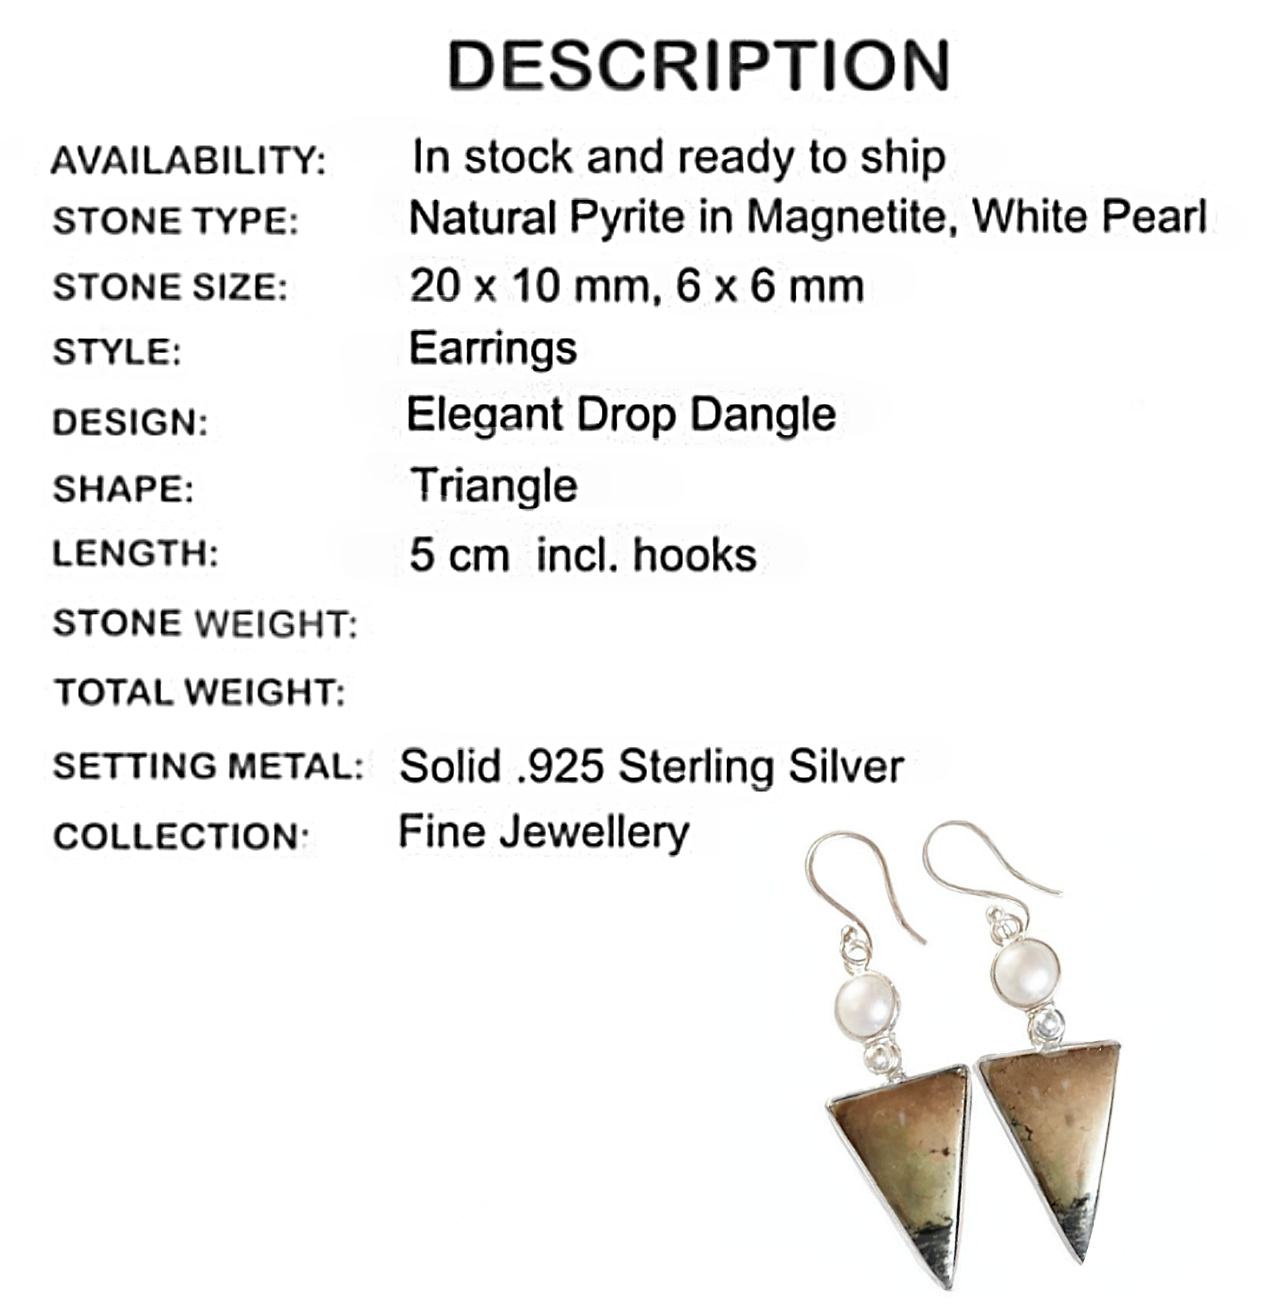 Peruvian Natural Golden Pyrite in Magnetite, White Pearl set in Solid .925 Sterling Silver Earrings - BELLADONNA